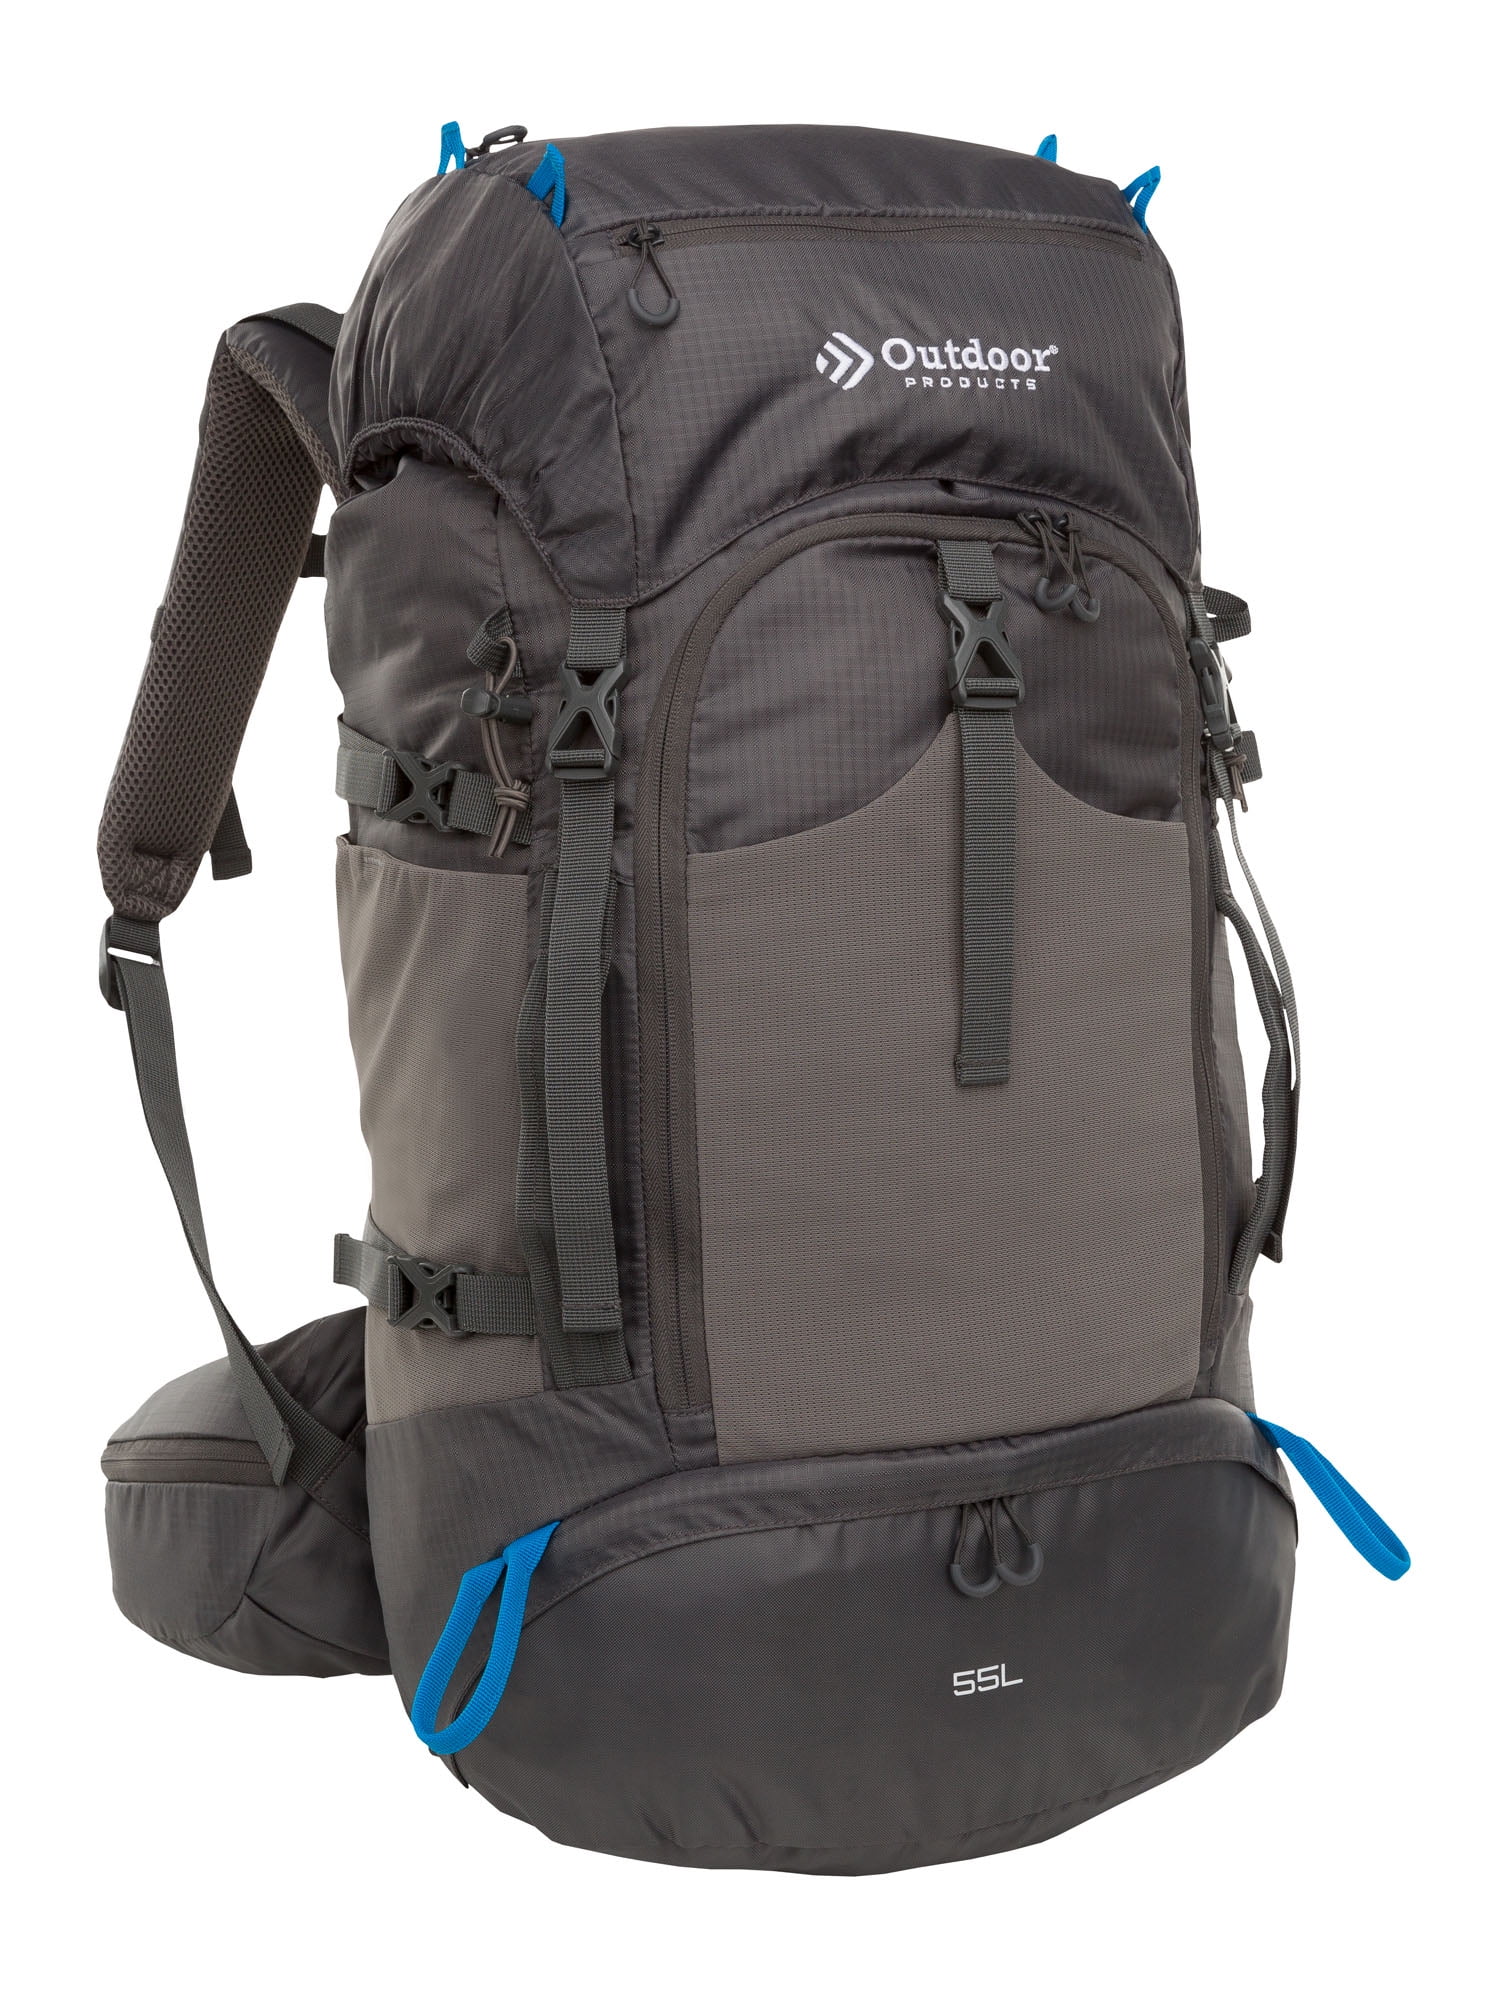 Outdoor Products Whitney 55 Liter Technical Frame Pack Backpack, Hydration Compatible, Rucksack, Gray, Unisex